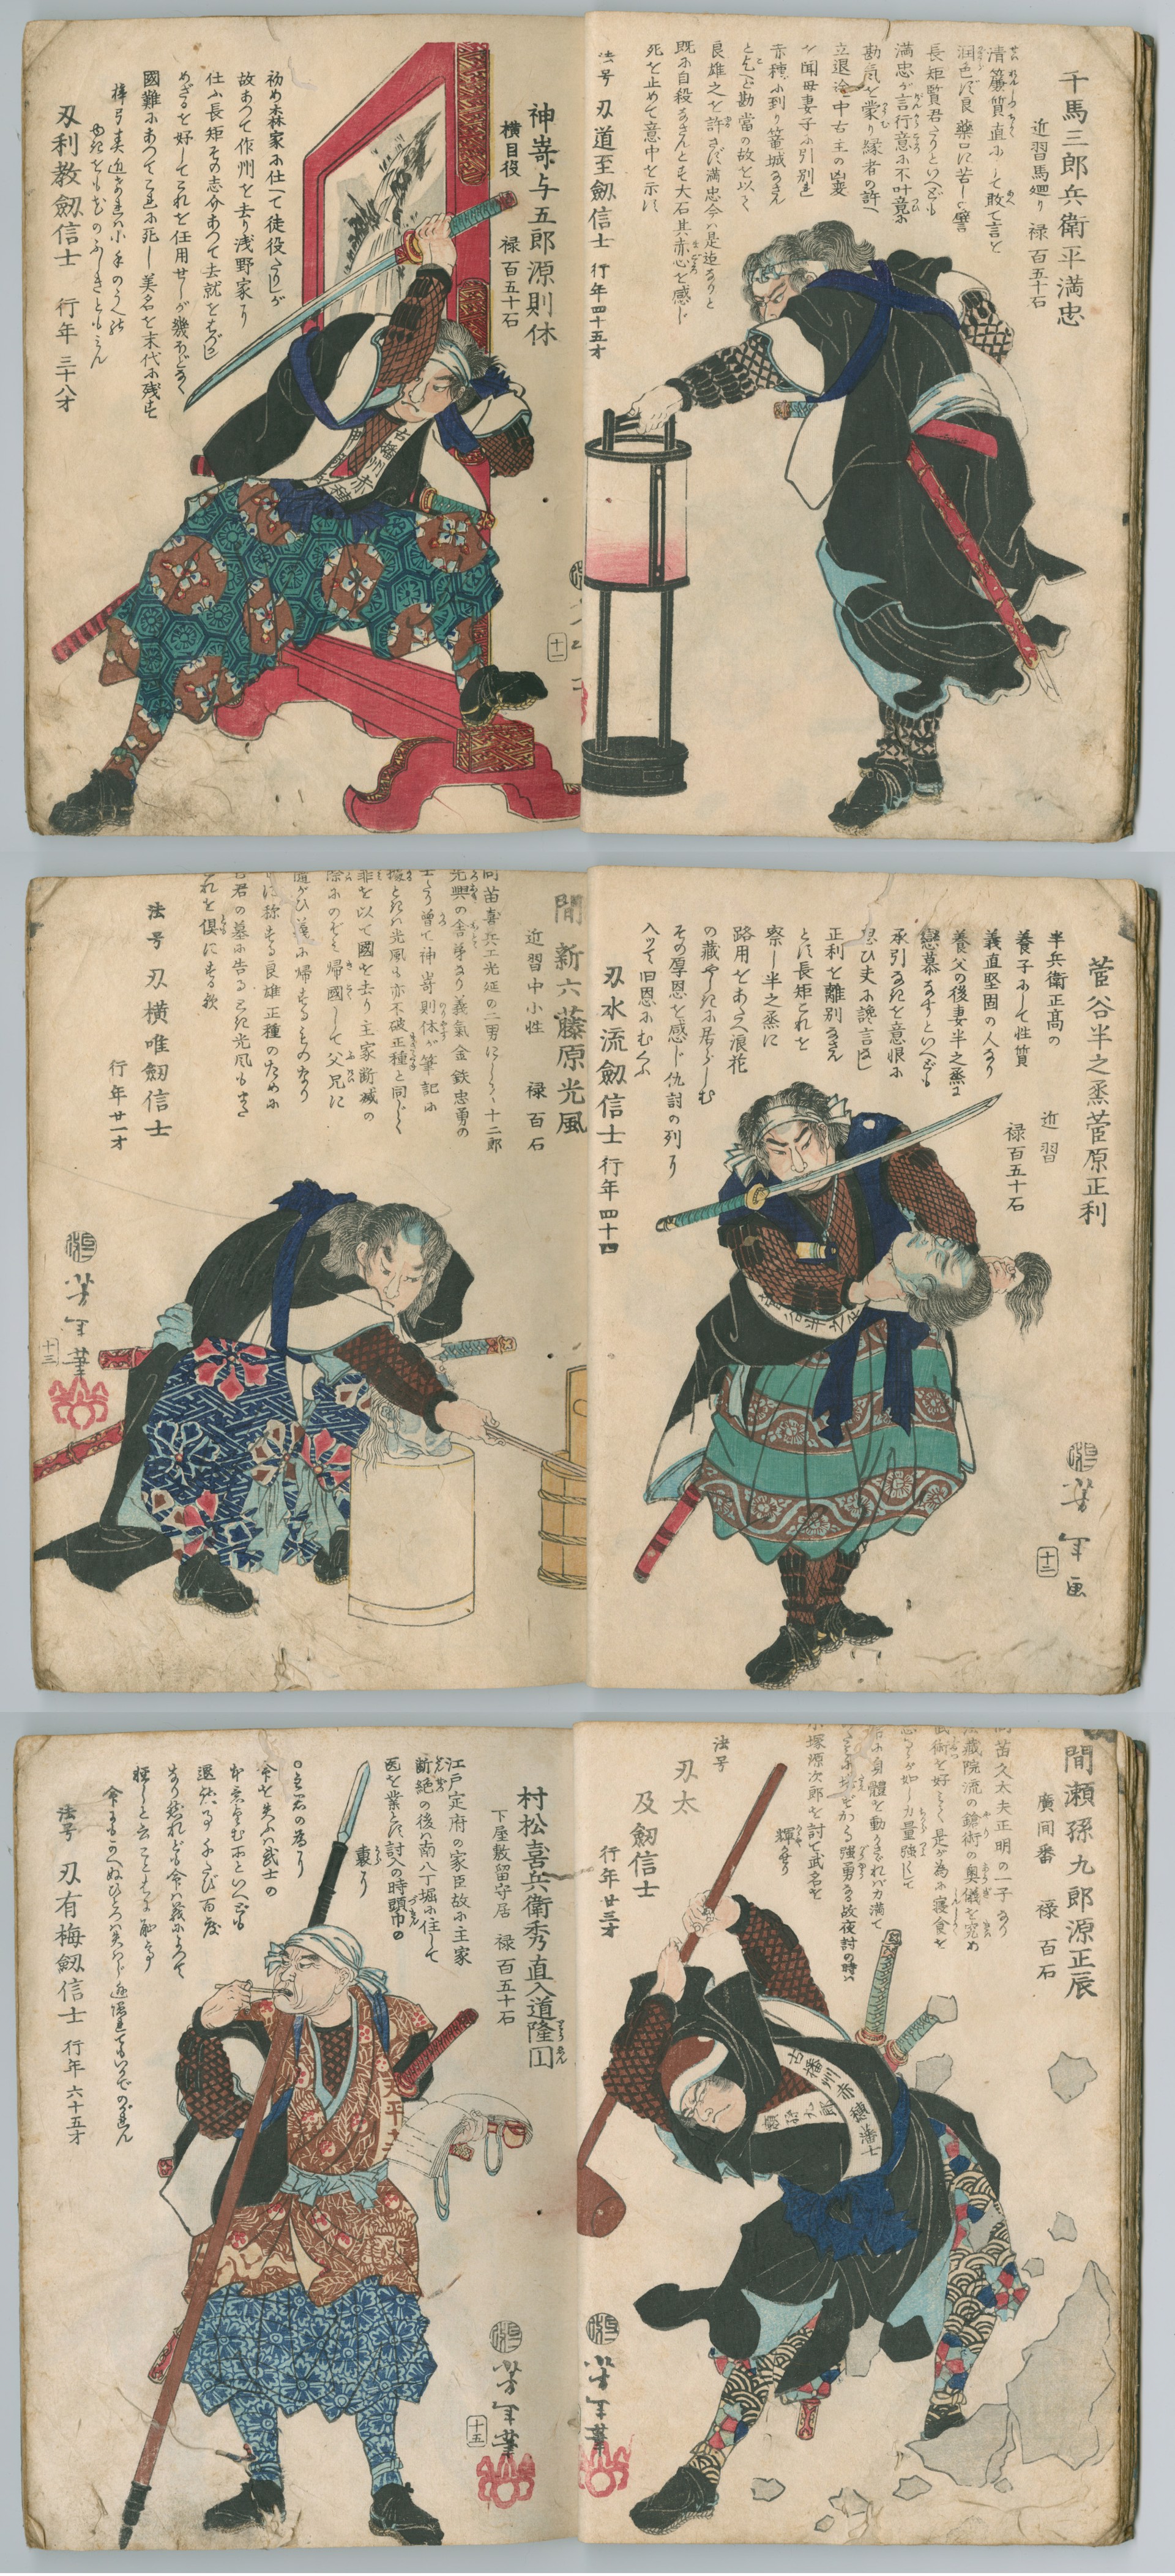 Complete Series of 50, including their enemy Lord Kira and a preface by Kanagaki Robun Pictorial Biographies of the Loyal Retainers by Yoshitoshi